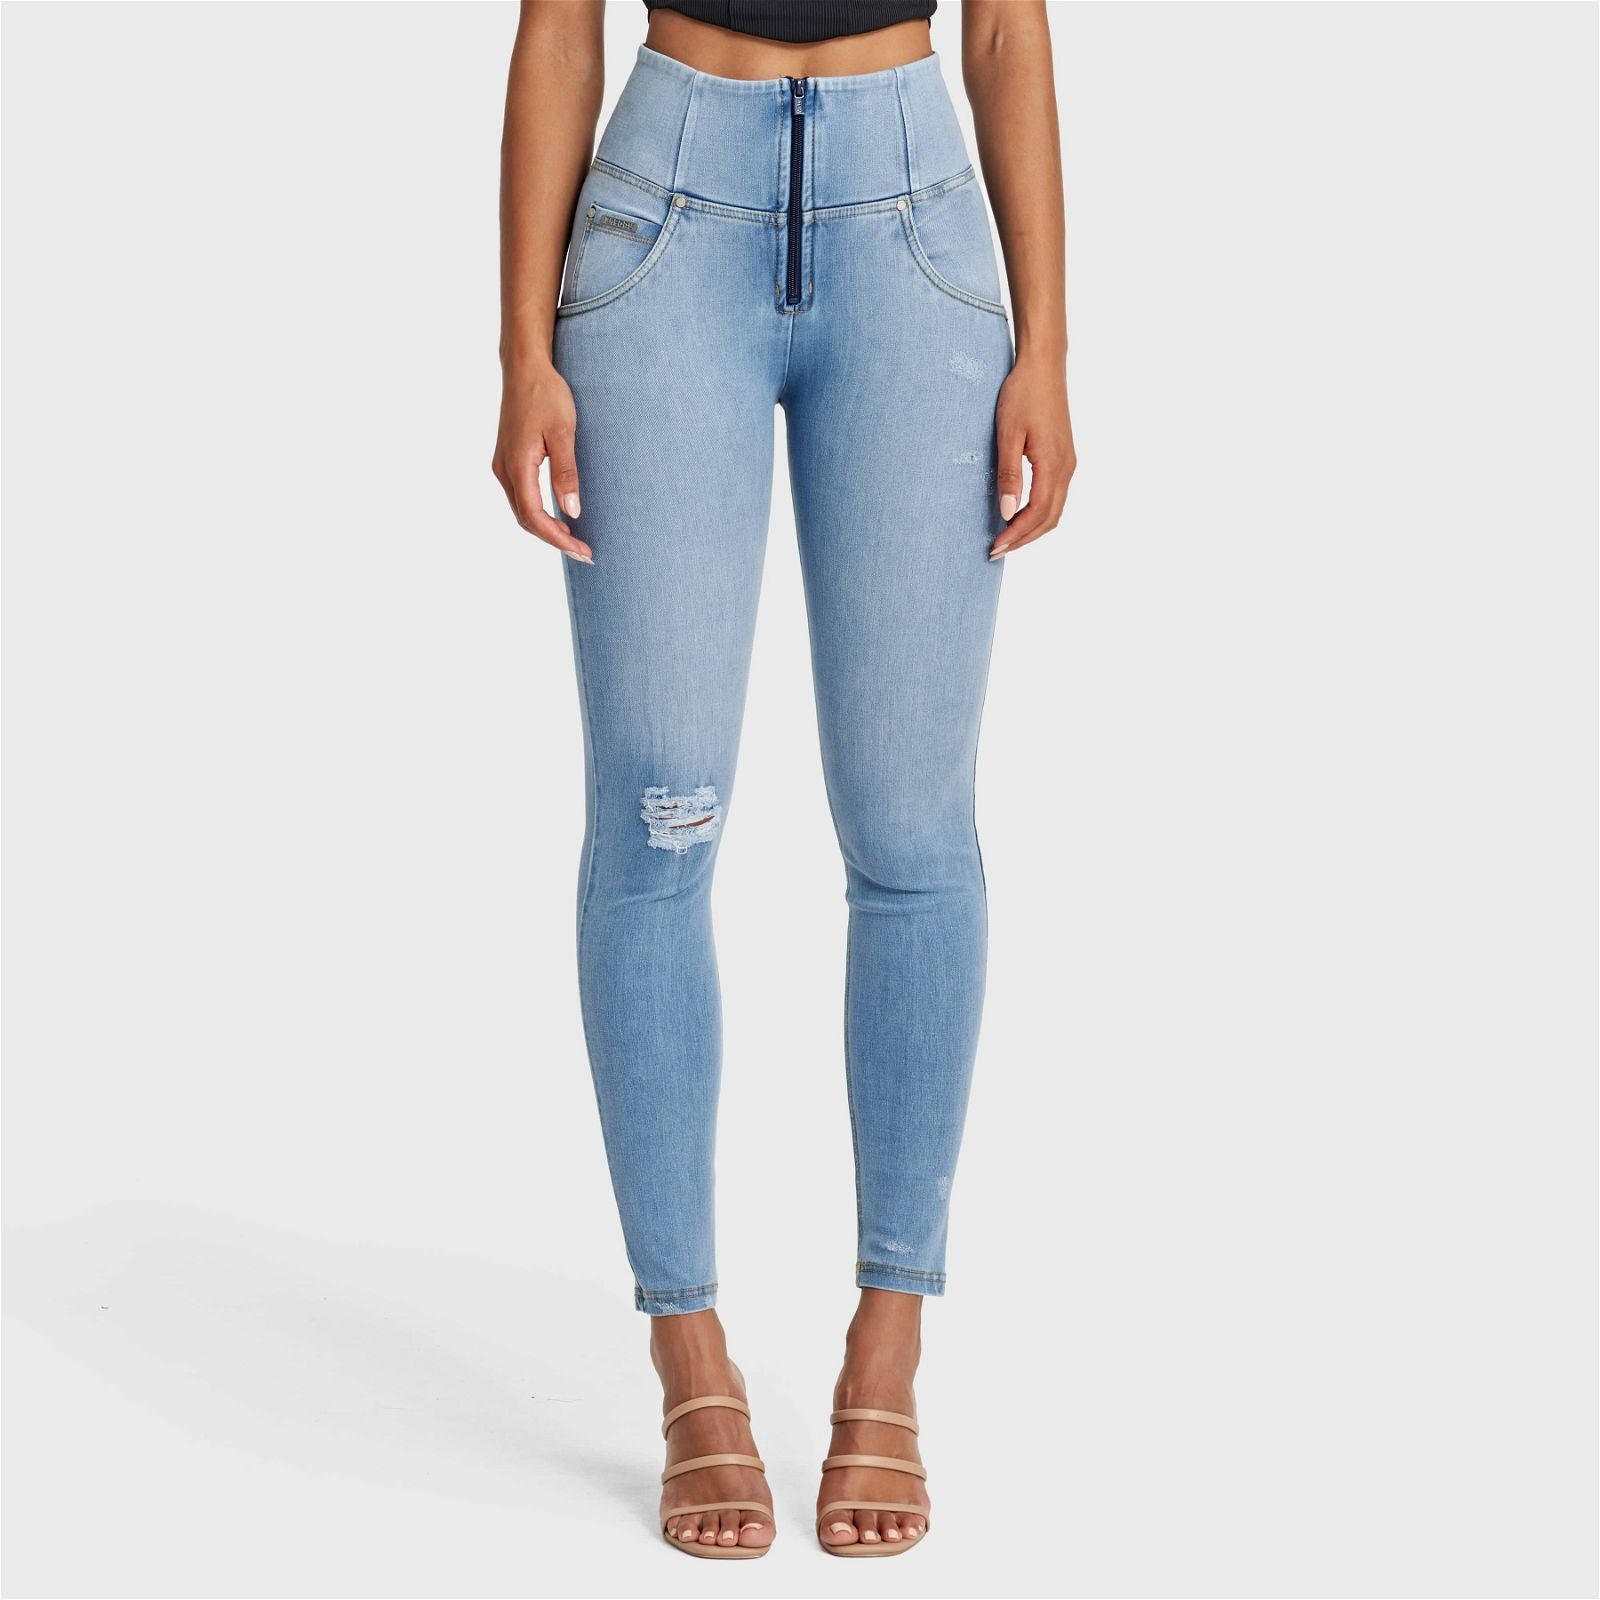 WR.UP® SNUG Distressed Jeans - High Waisted - Full Length - Light Blue + Yellow Stitching 1